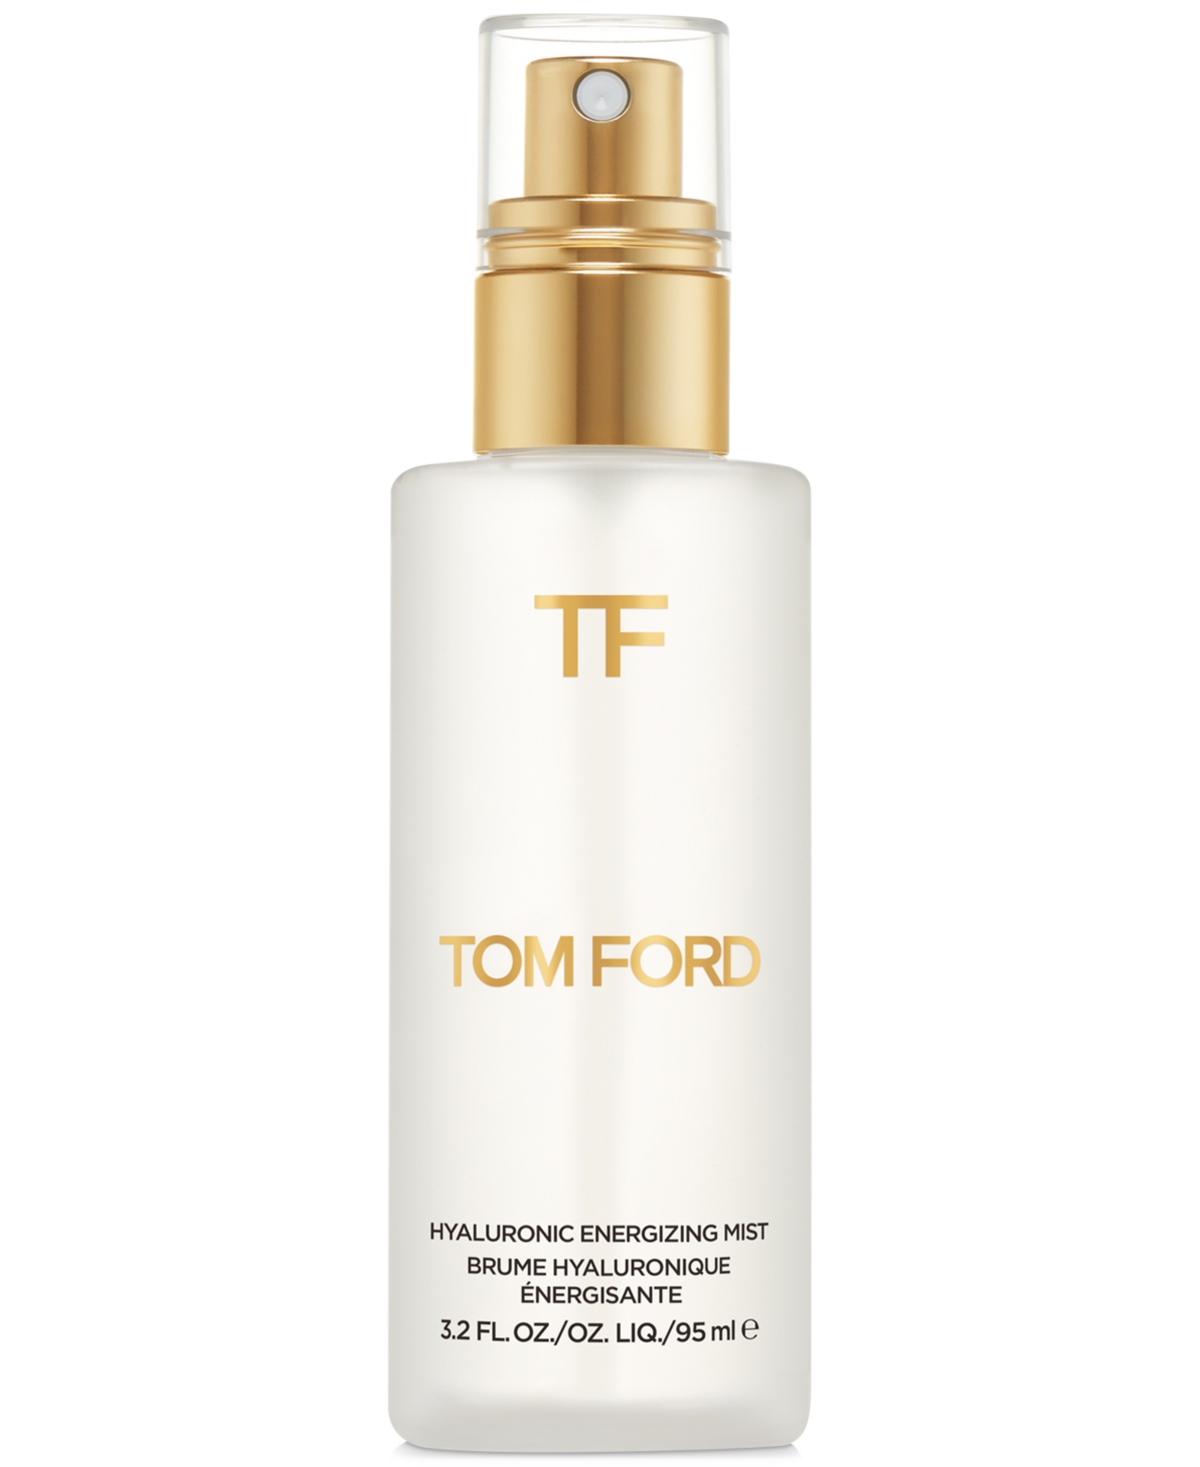 Tom Ford Hyaluronic Energizing Mist, . & Reviews - Skin Care - Beauty  - Macy's